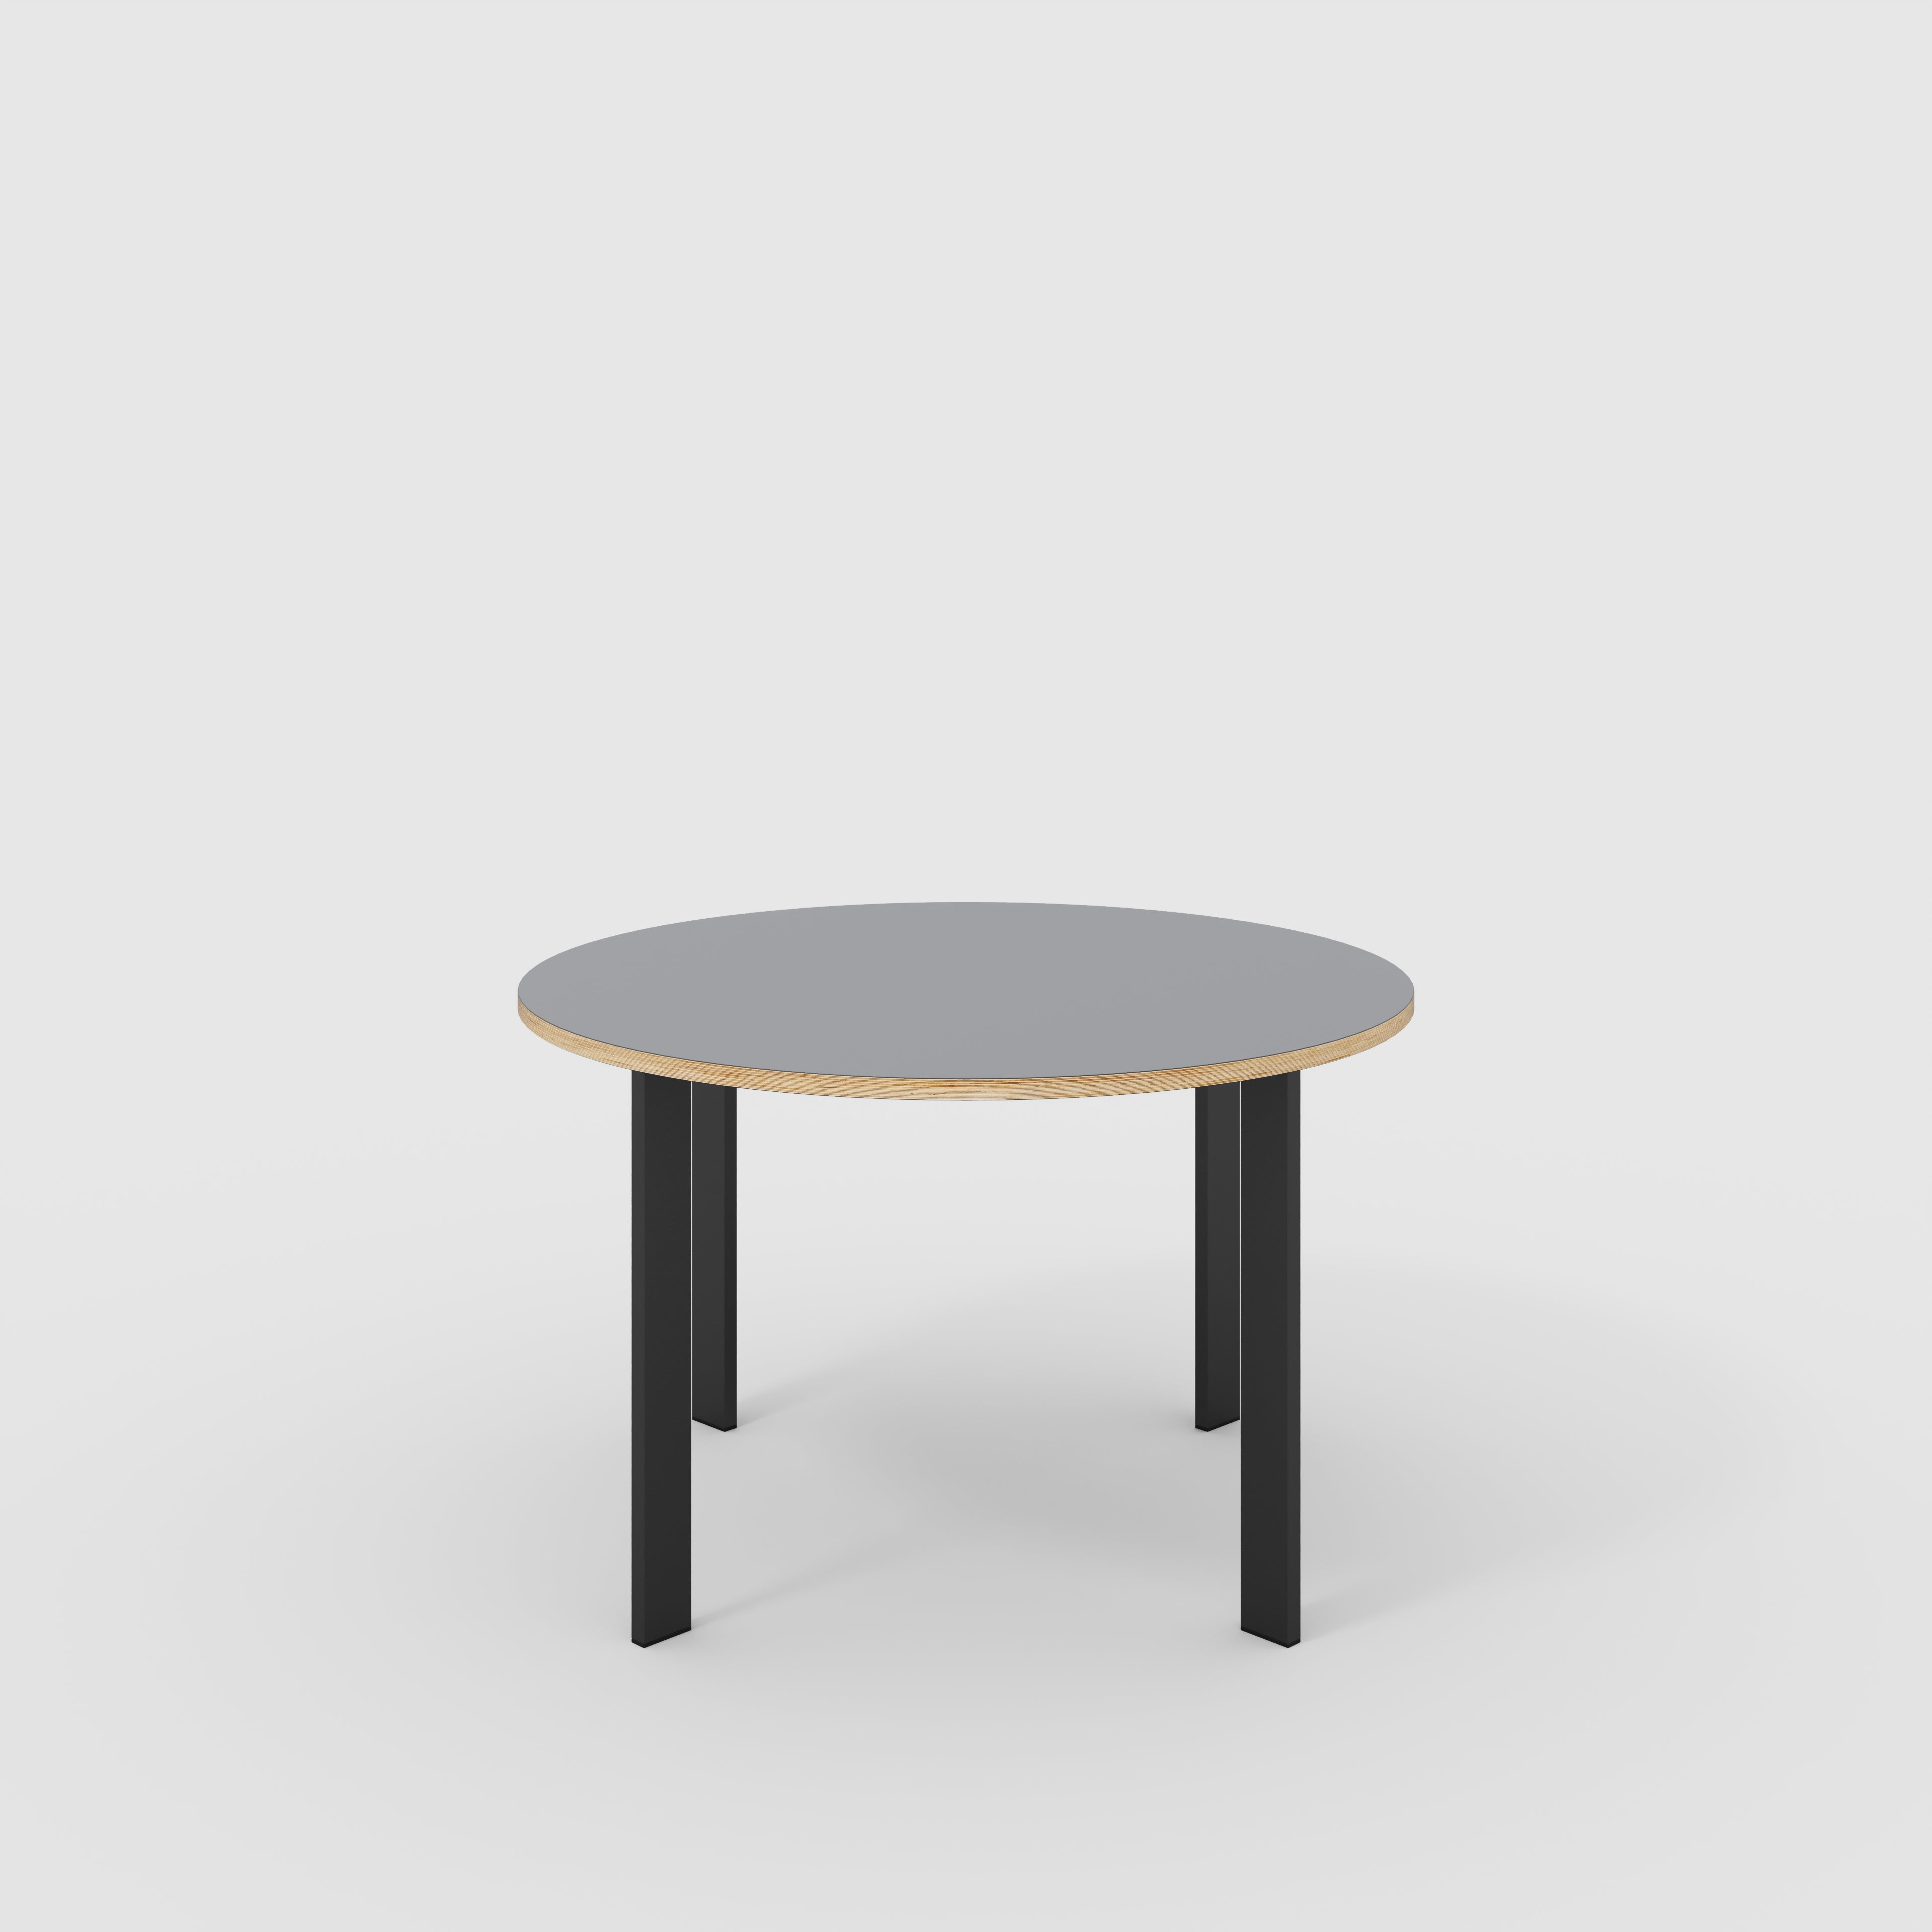 Round Table with Black Rectangular Single Pin Legs - Formica Tornado Grey - 1200(dia) x 750(h)